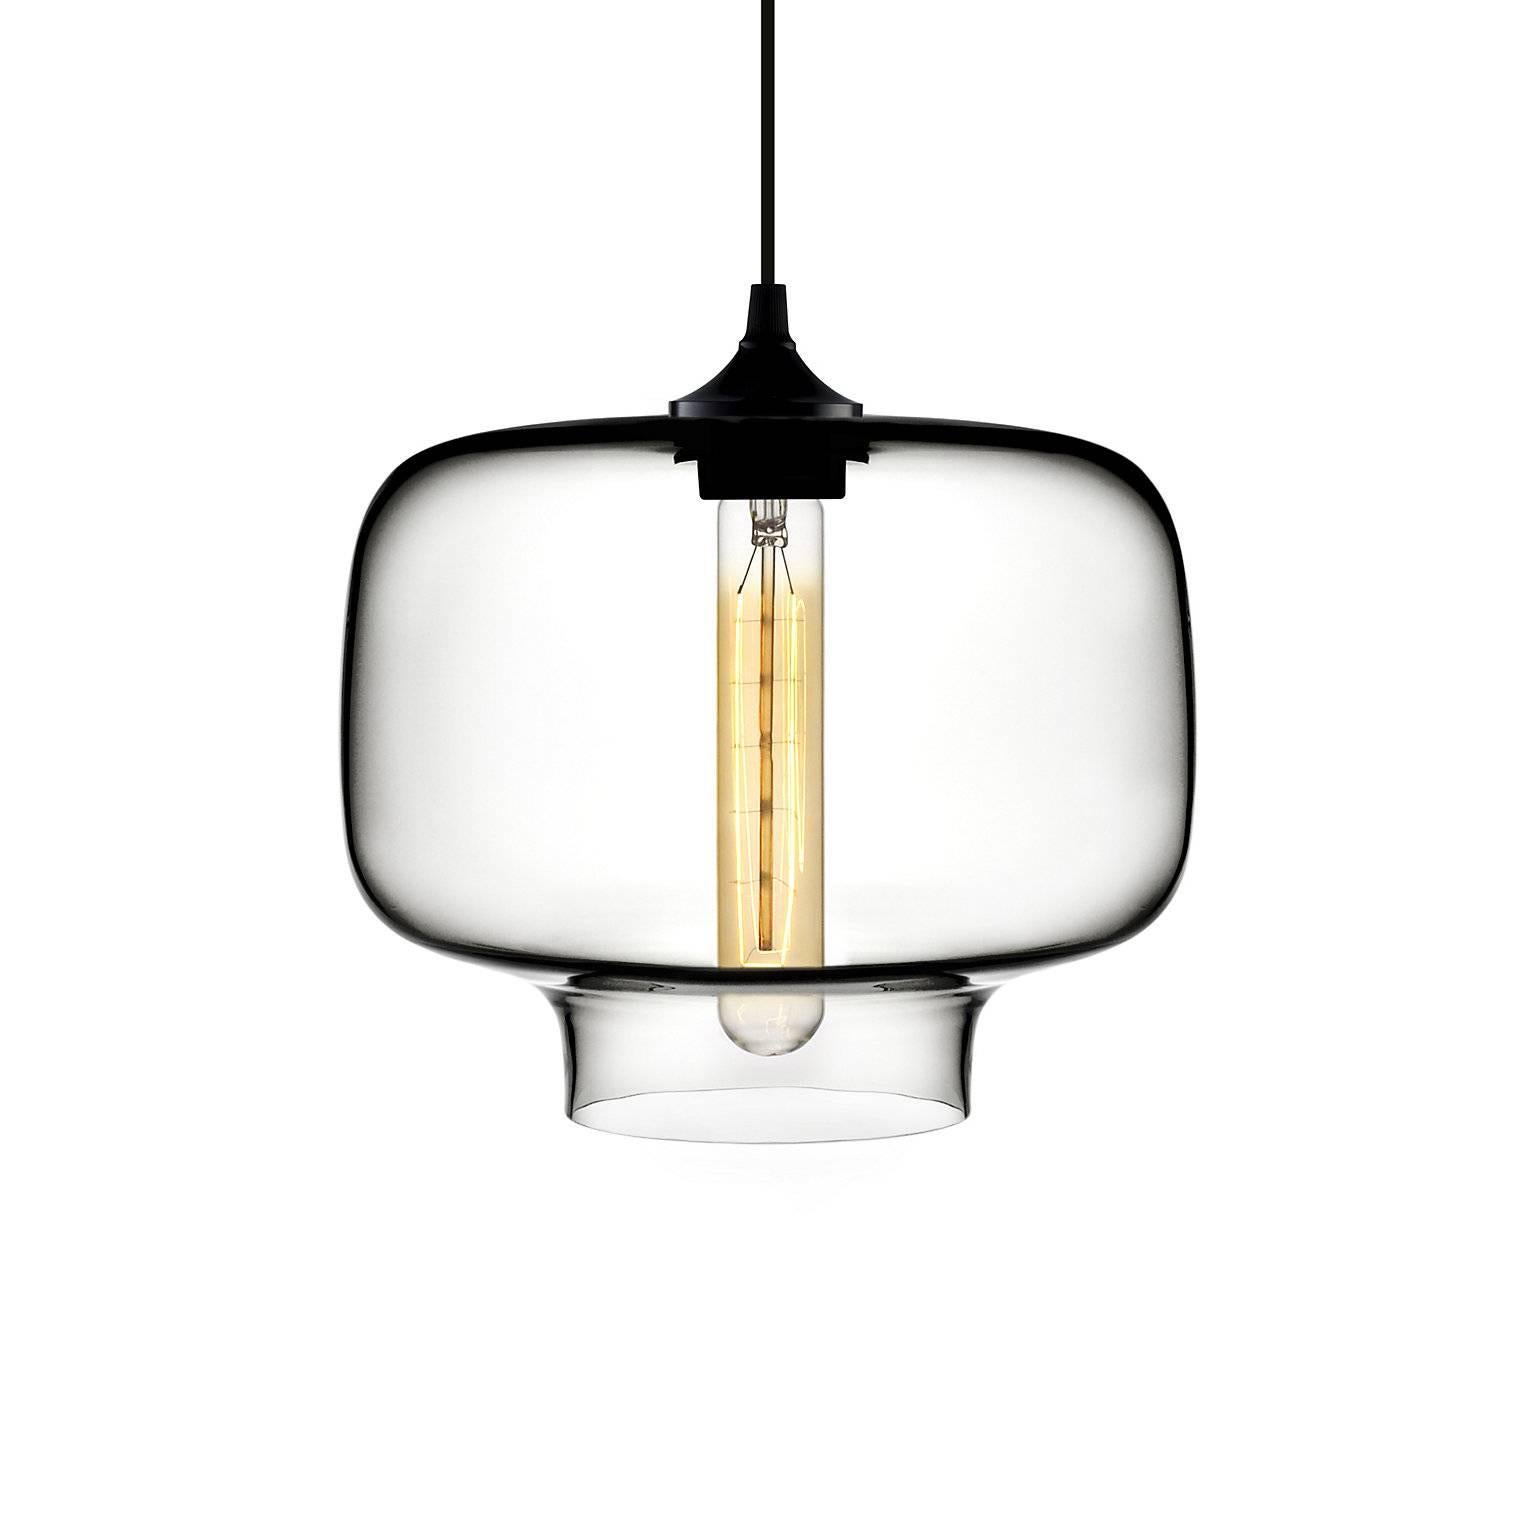 Contemporary Oculo Plum Handblown Modern Glass Pendant Light, Made in the USA For Sale